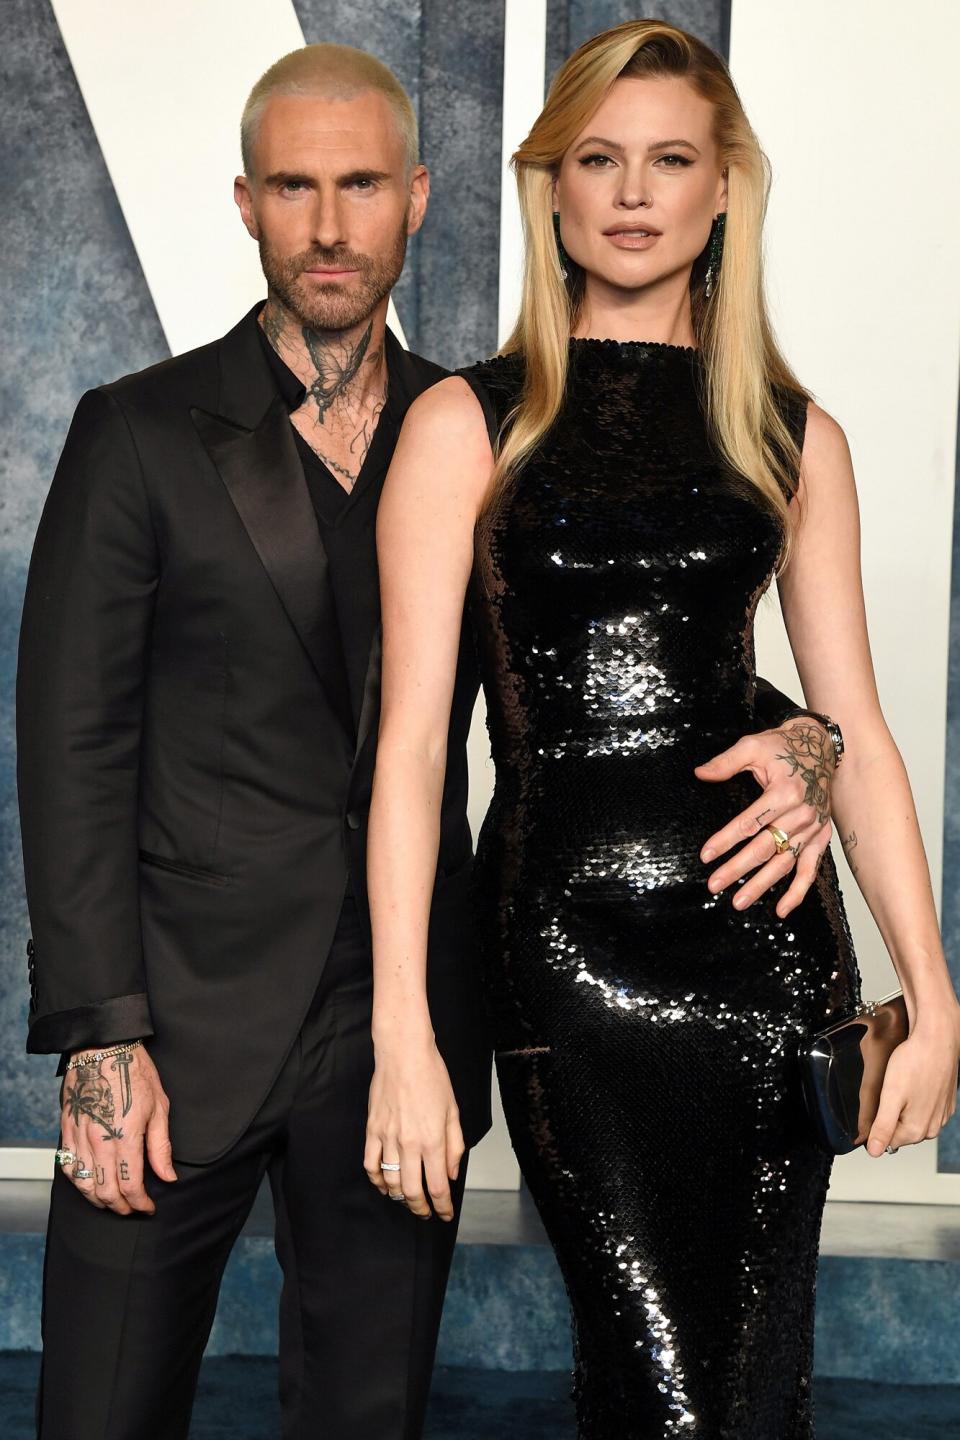 Adam Levine and Behati Prinsloo attend the 2023 Vanity Fair Oscar Party Hosted By Radhika Jones at Wallis Annenberg Center for the Performing Arts on March 12, 2023 in Beverly Hills, California.